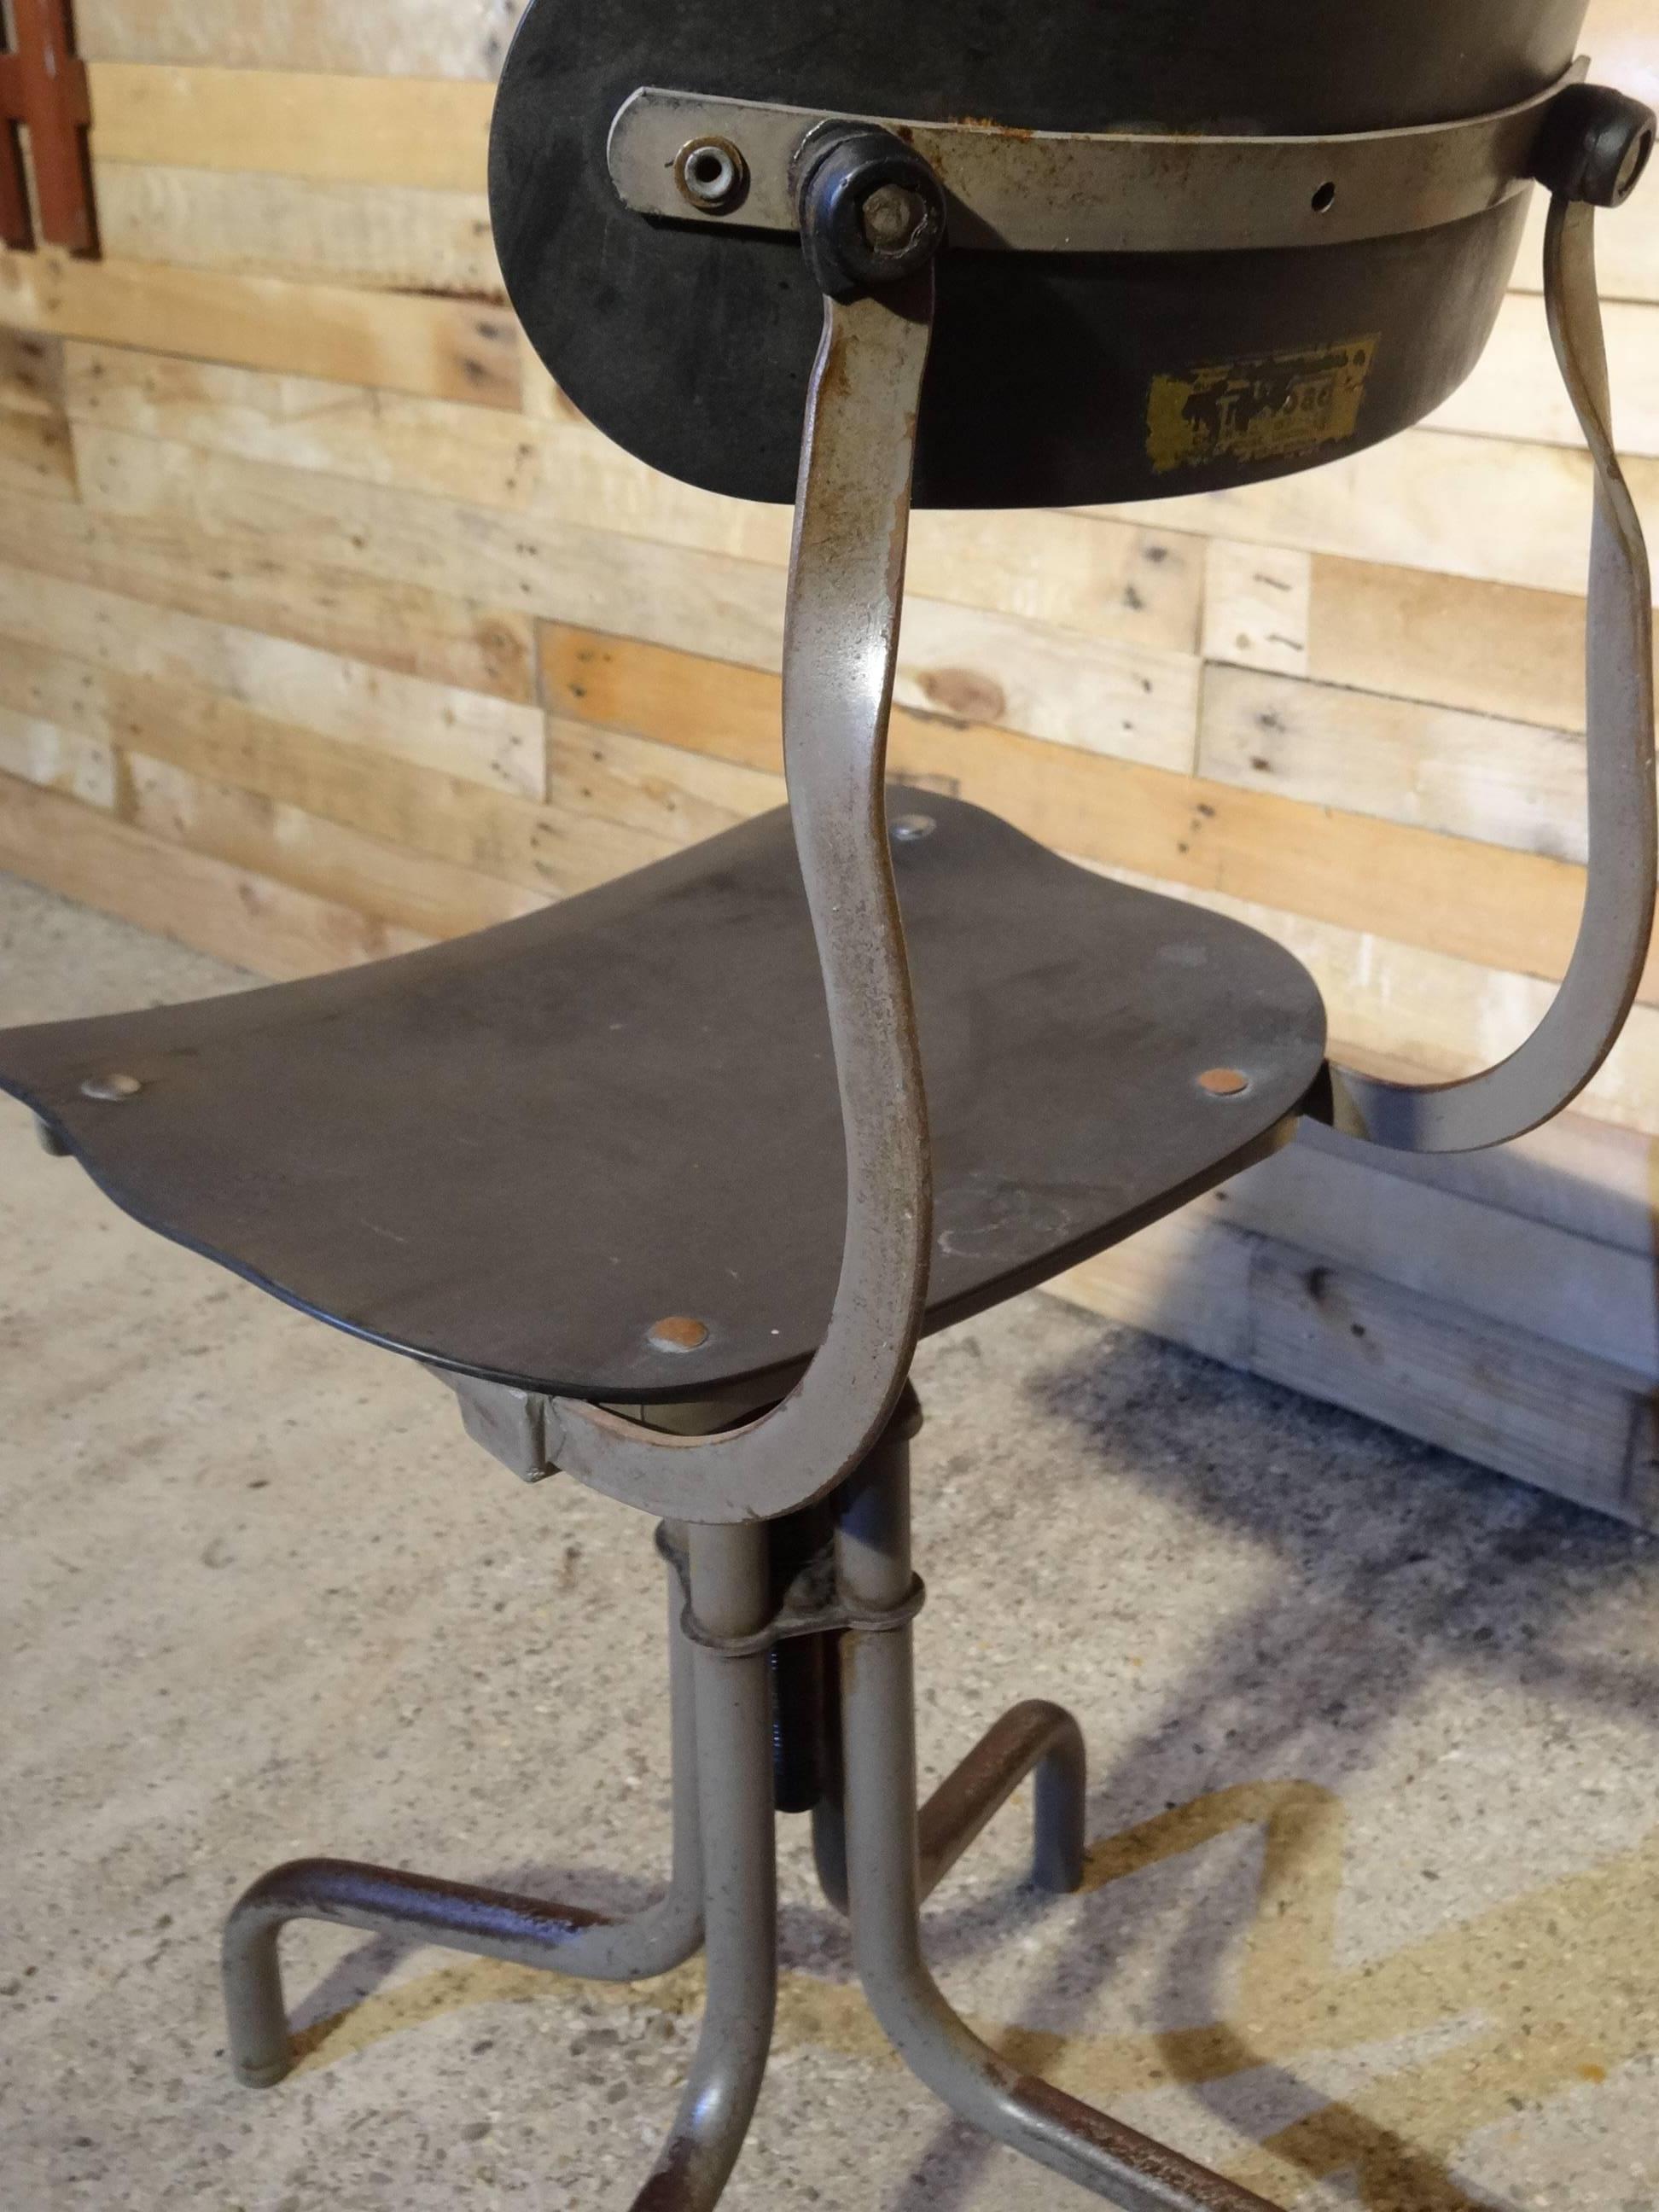 1930s Industrial sewing stool. 

Sewing stool made in the 1930s, came out of the Windsor of Woollies knitwear mill, they made clothes for the European royal families.

Seat height: 54cm, back height: 88cm, depth: 30cm, width: 30cm.